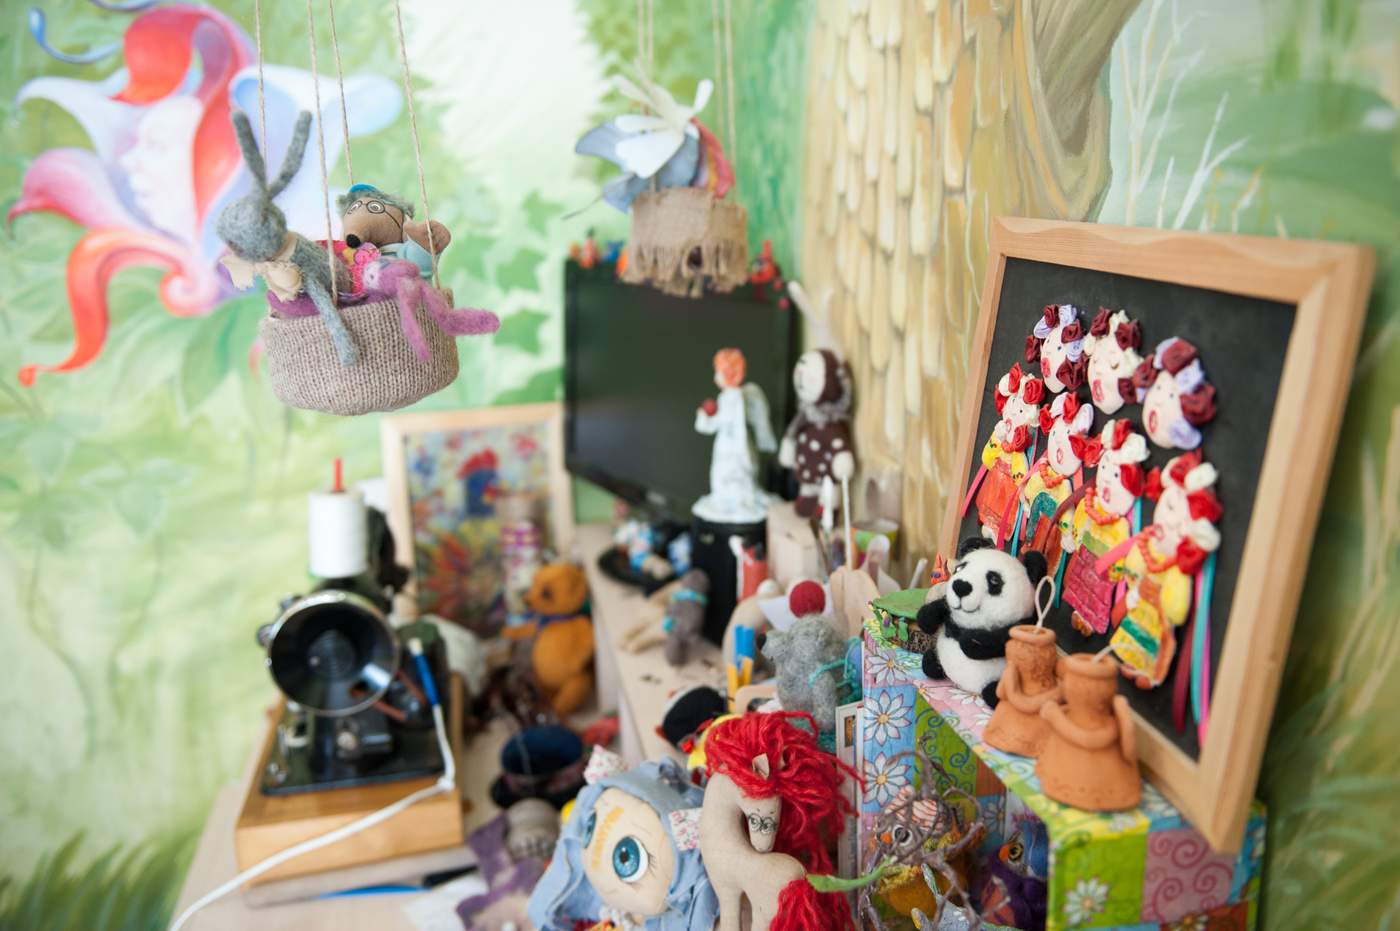 The interior of Valentina’s centre has been thoughtfully planned and decorated to remind its visitors of a wonderland